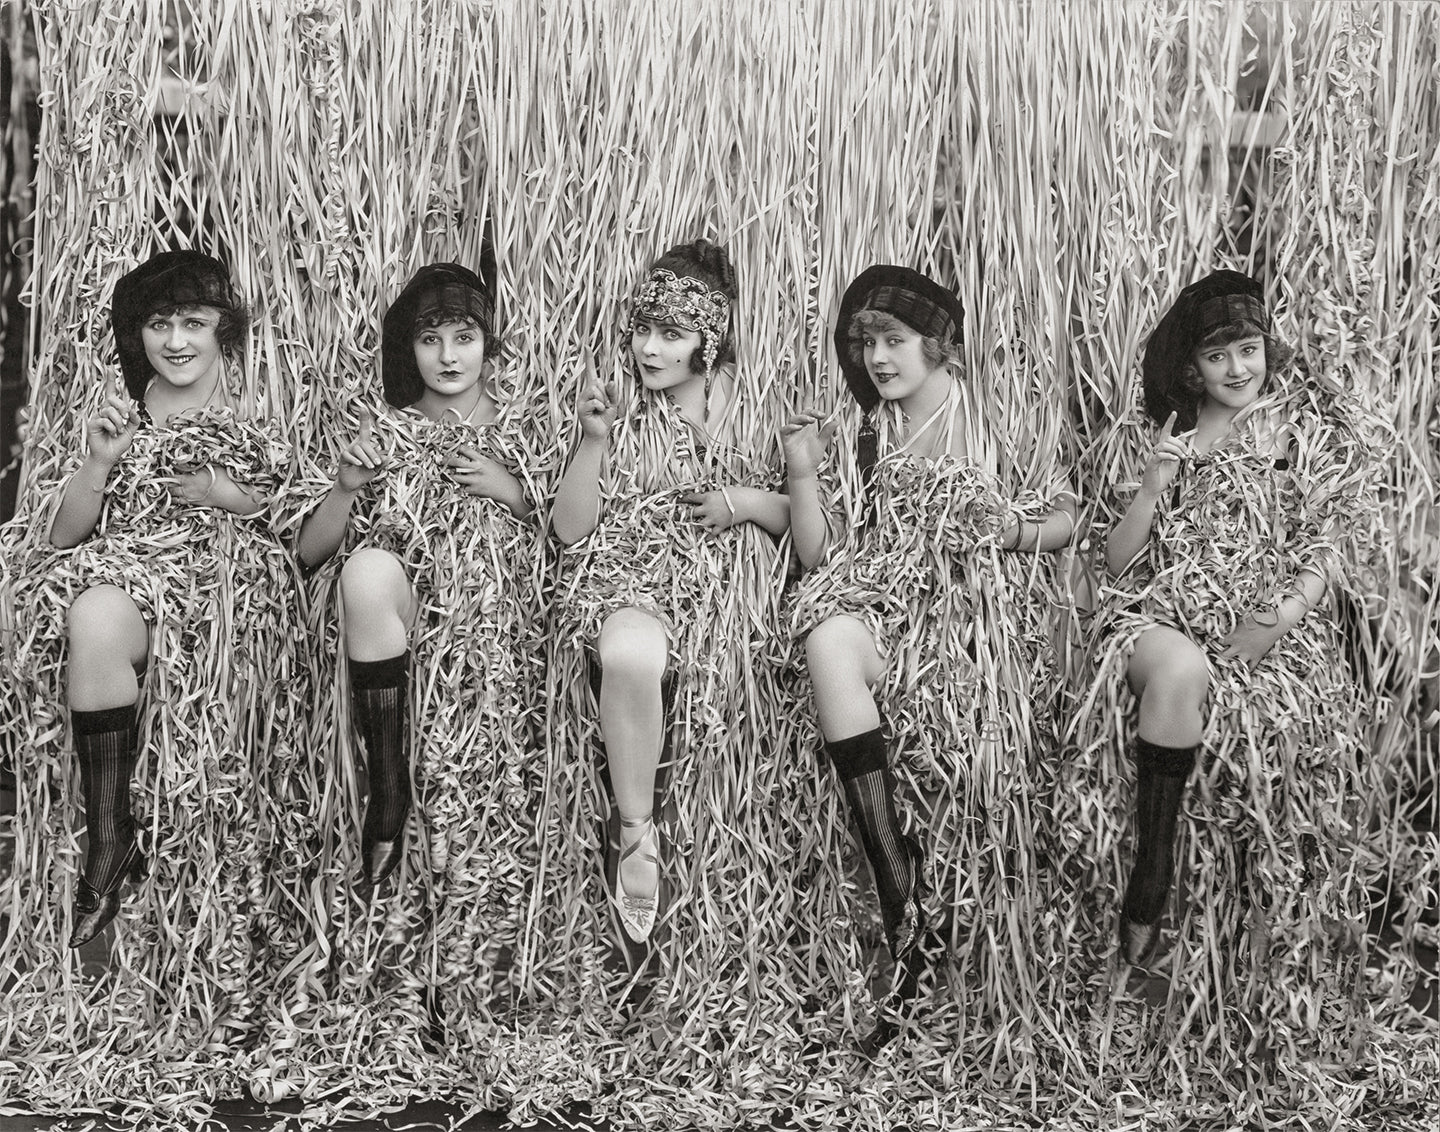 Pin-up photo, Bathing Beauties, in Shredded Paper, 1918 Historical Pix